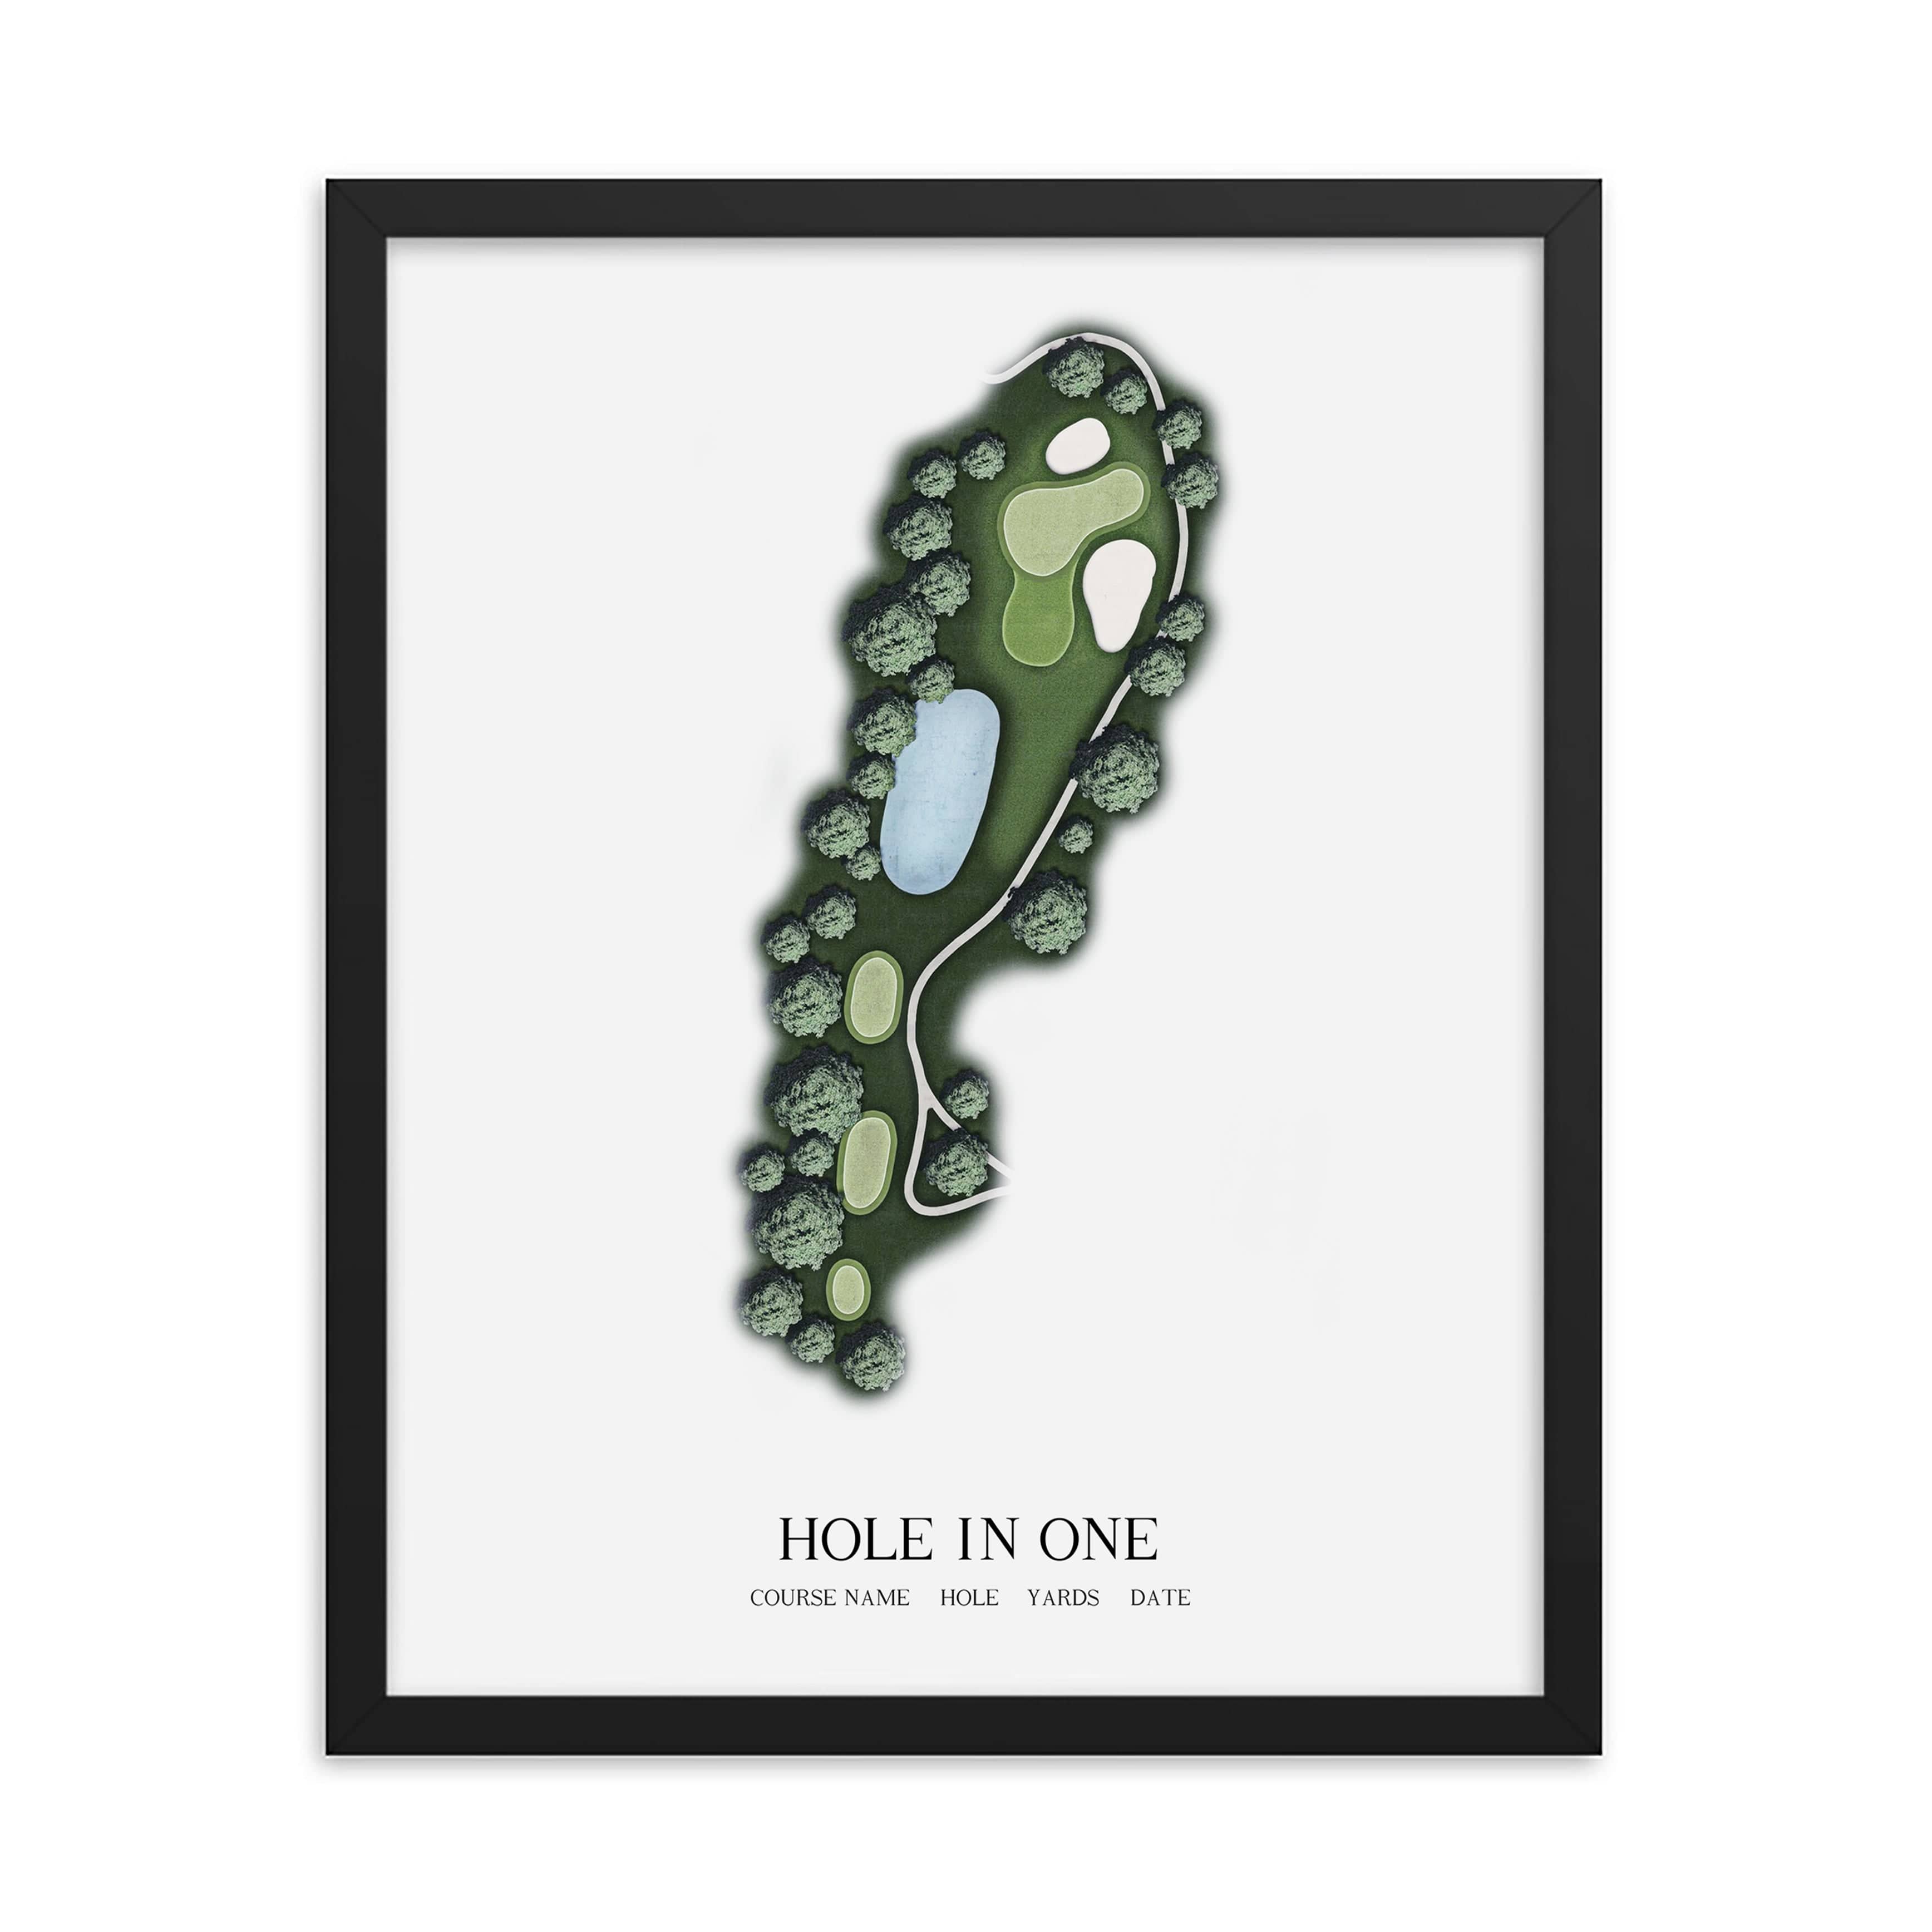 The 19th Hole Golf Shop - Golf Course Prints -  8" x 10" / Black -Hole in One- Golf Course Map